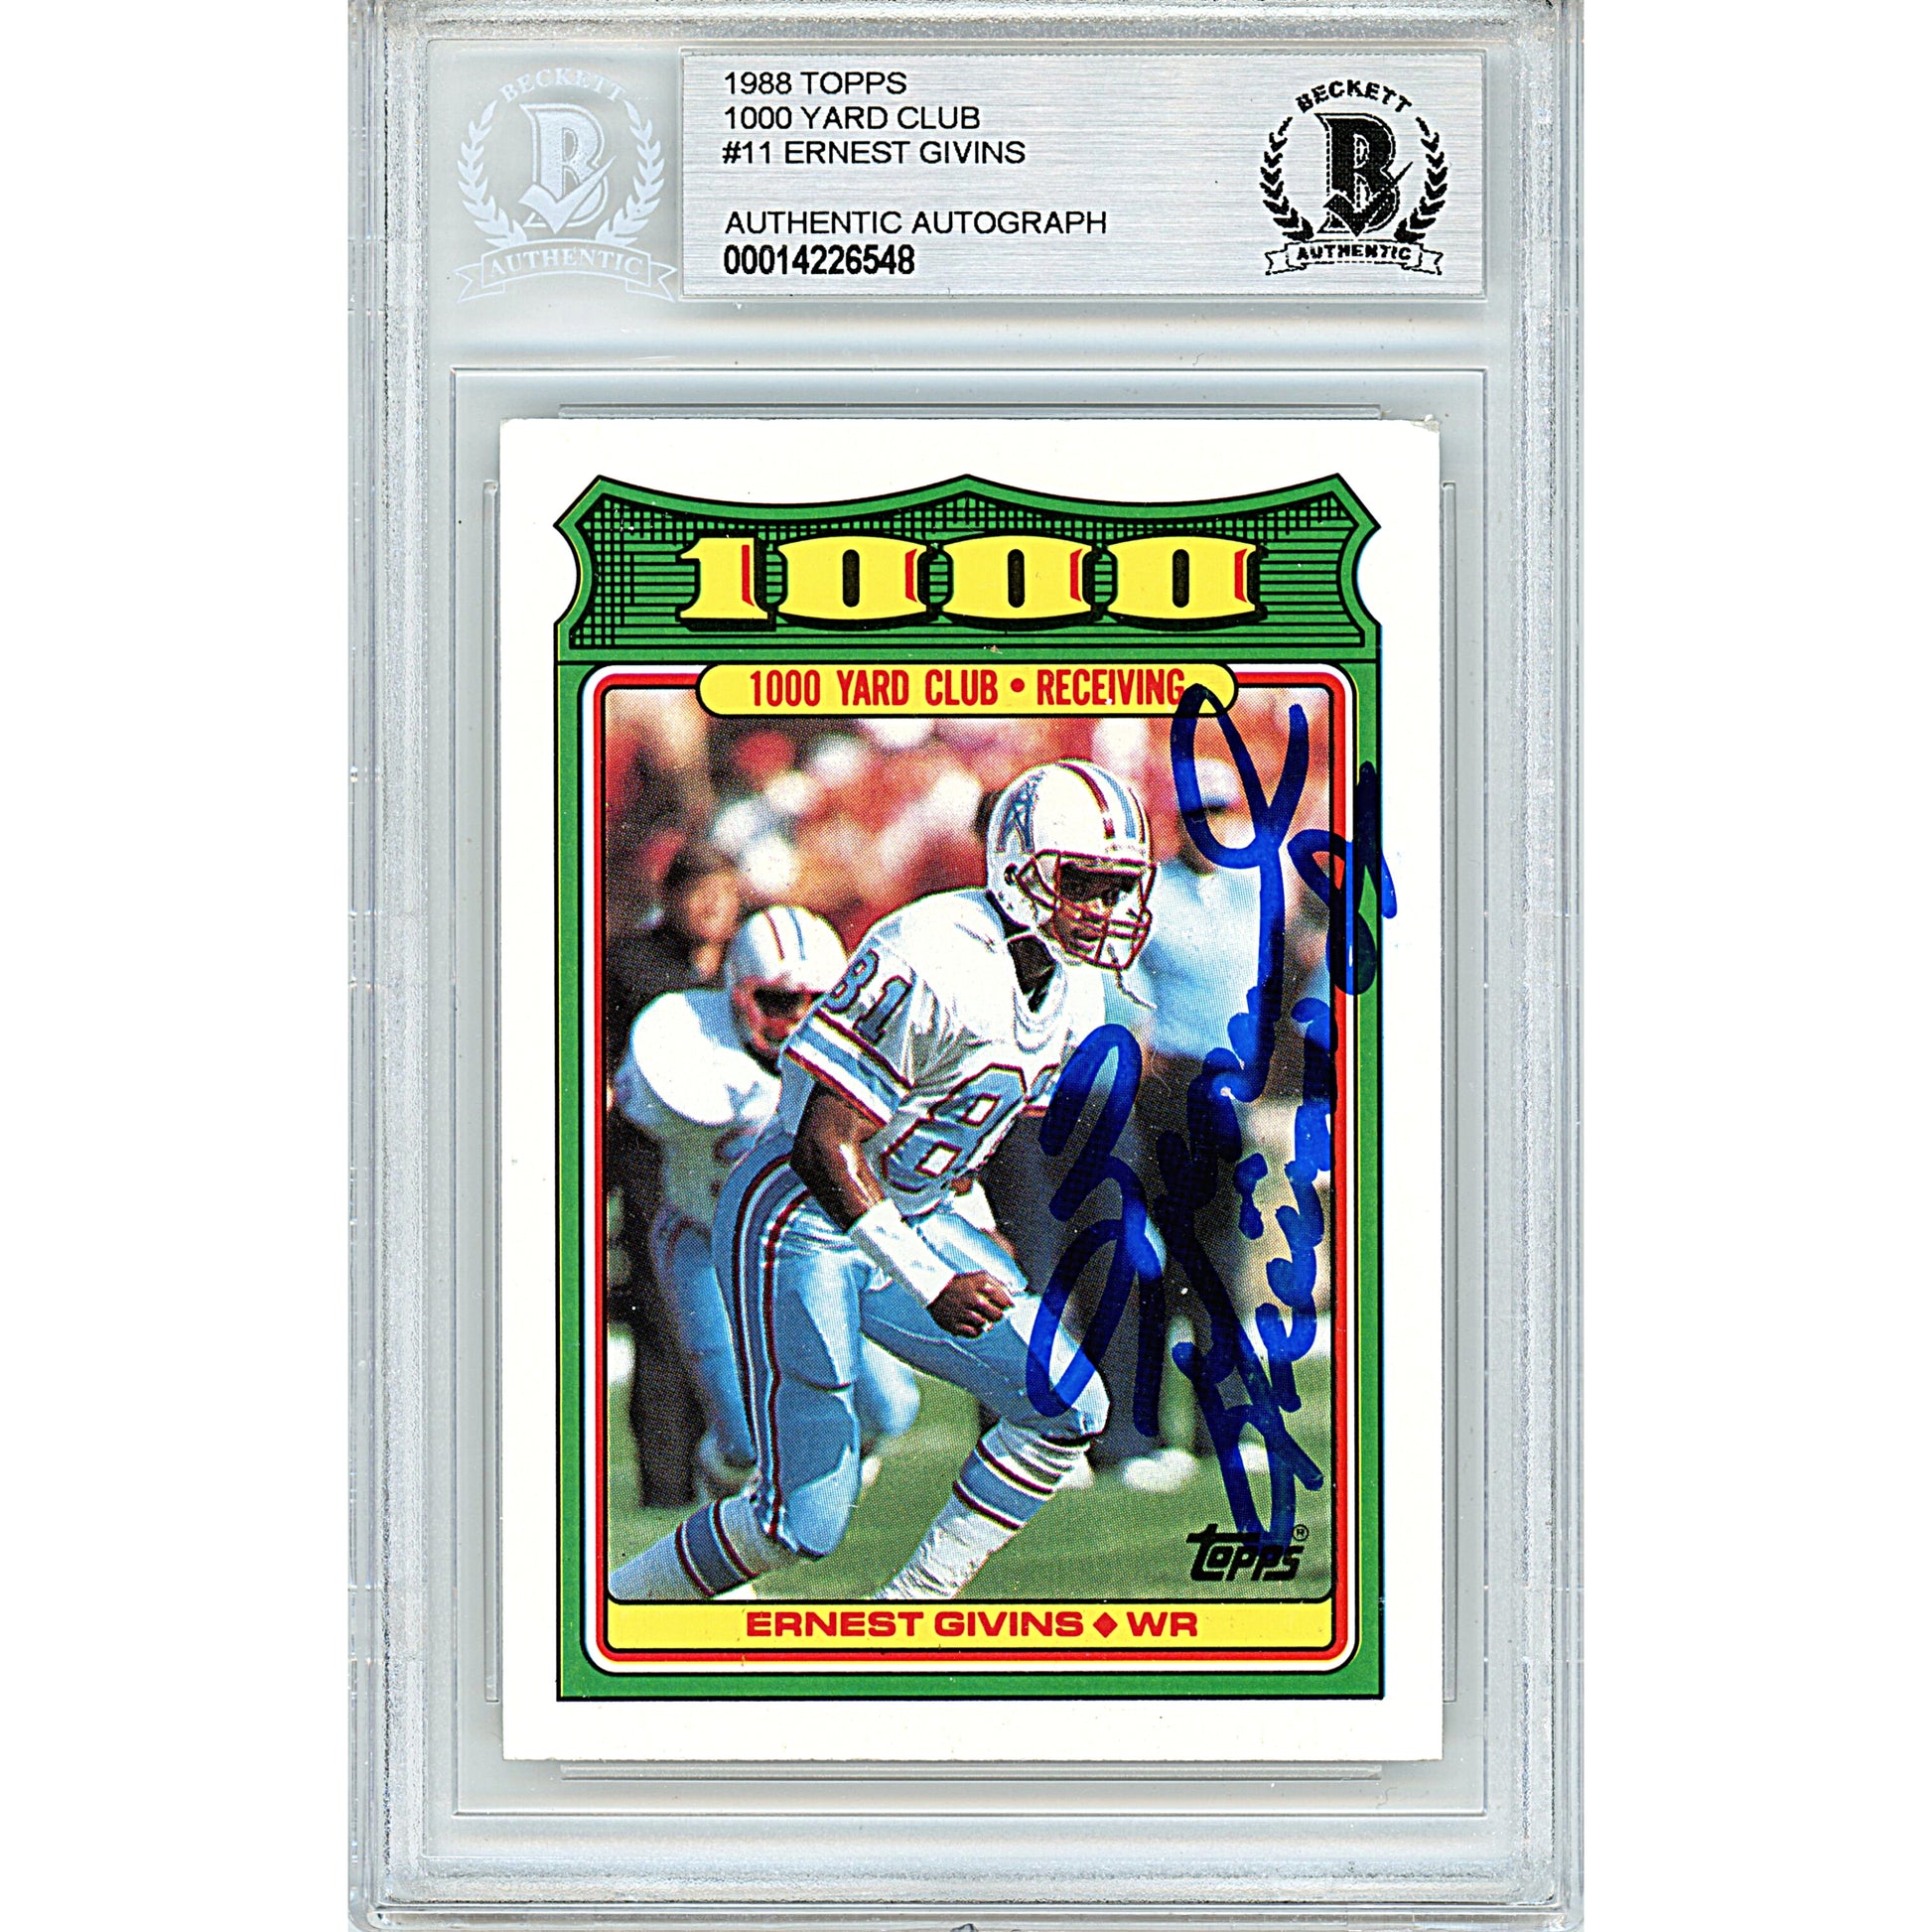 Footballs- Autographed- Ernest Givins Signed Houston Oilers 1988 Topps 1000 Yard Club Football Card Beckett BAS Slabbed 00014226548 - 101